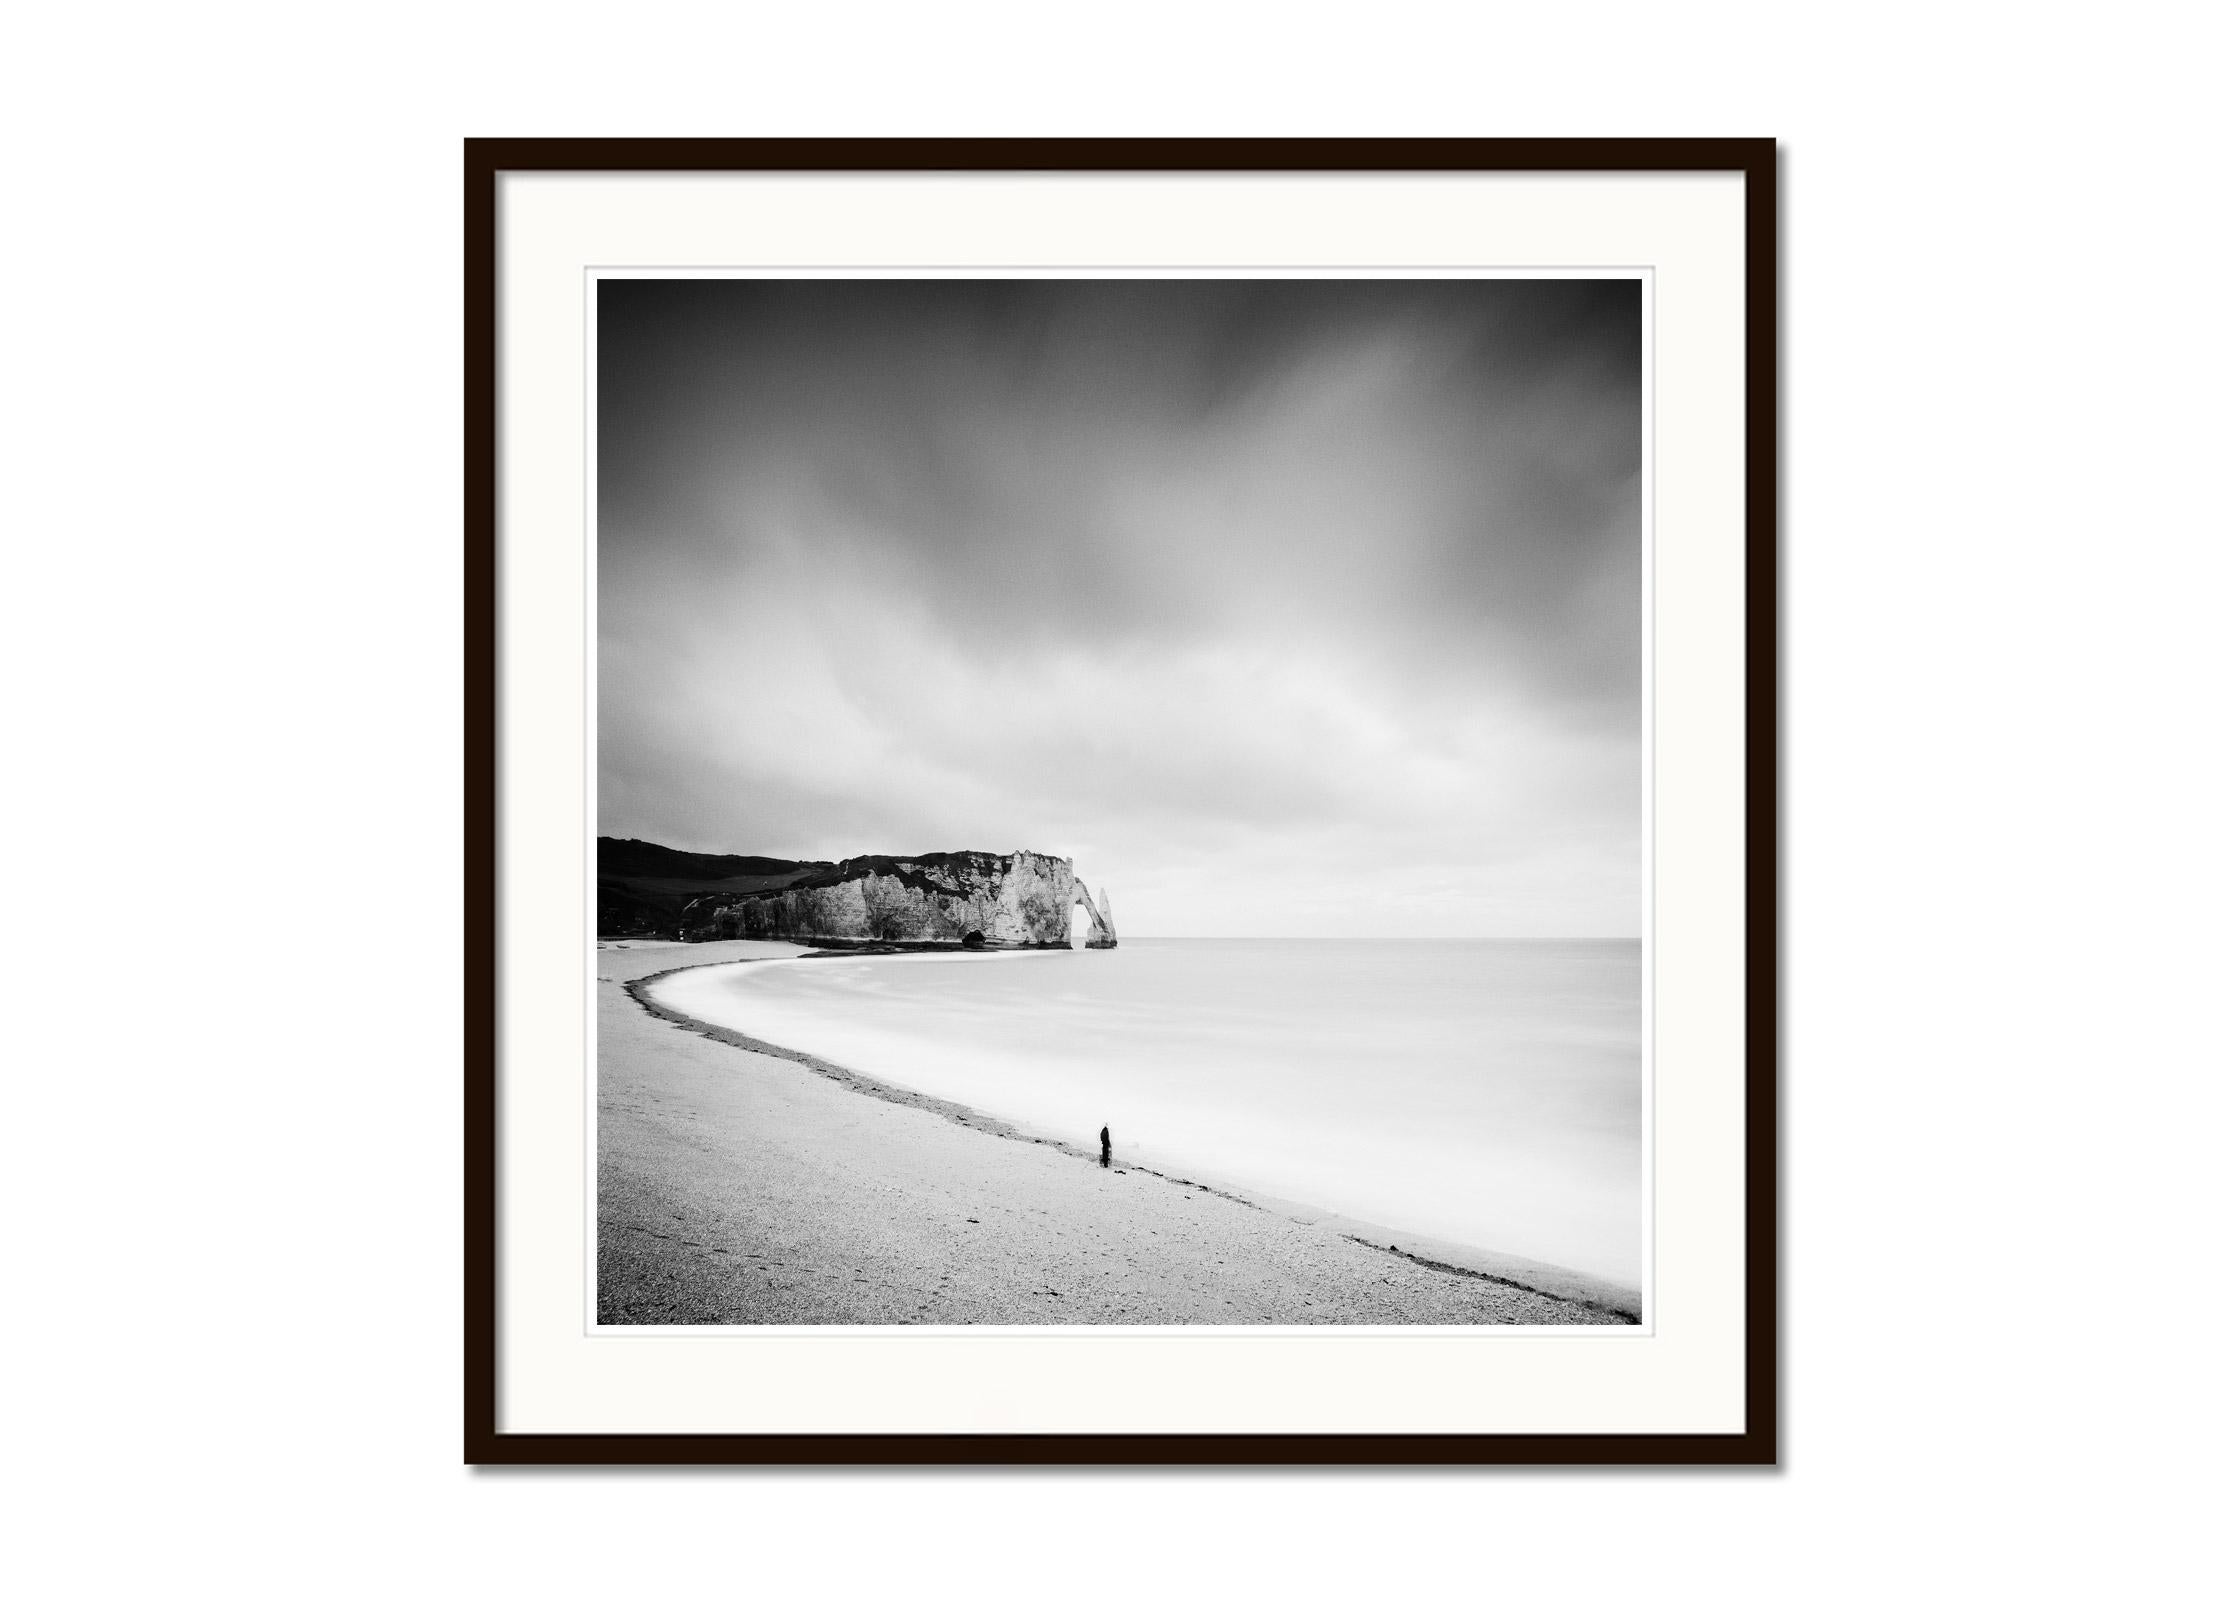 Fishermans Dream beach coast cliffs black white landscape fine art photography - Gray Black and White Photograph by Gerald Berghammer, Ina Forstinger